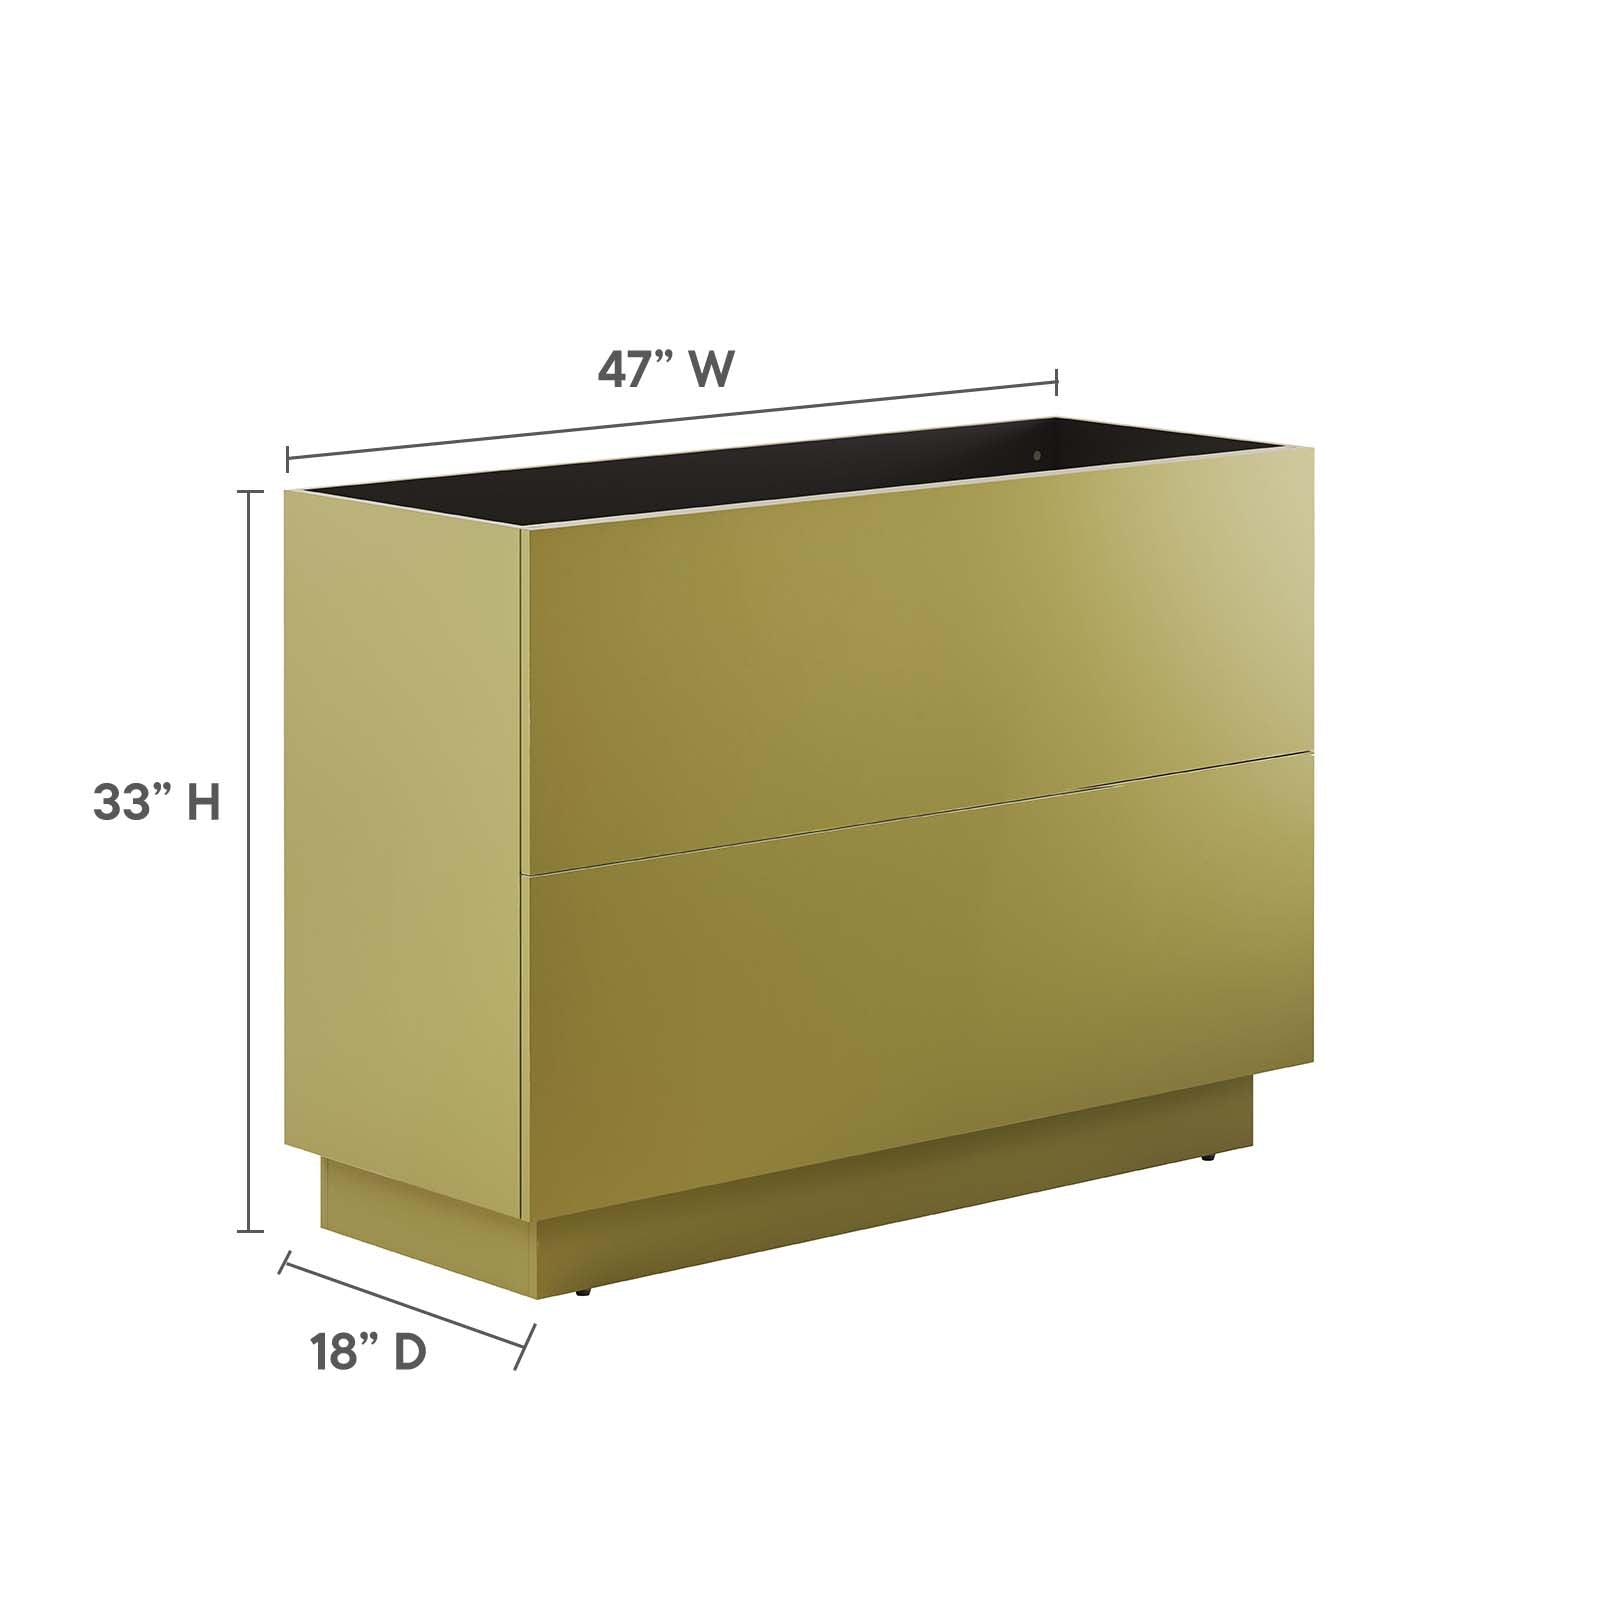 Quantum 48" Bathroom Vanity Cabinet (Sink Basin Not Included) By Modway - EEI-6135 | Bathroom Accessories | Modway - 7